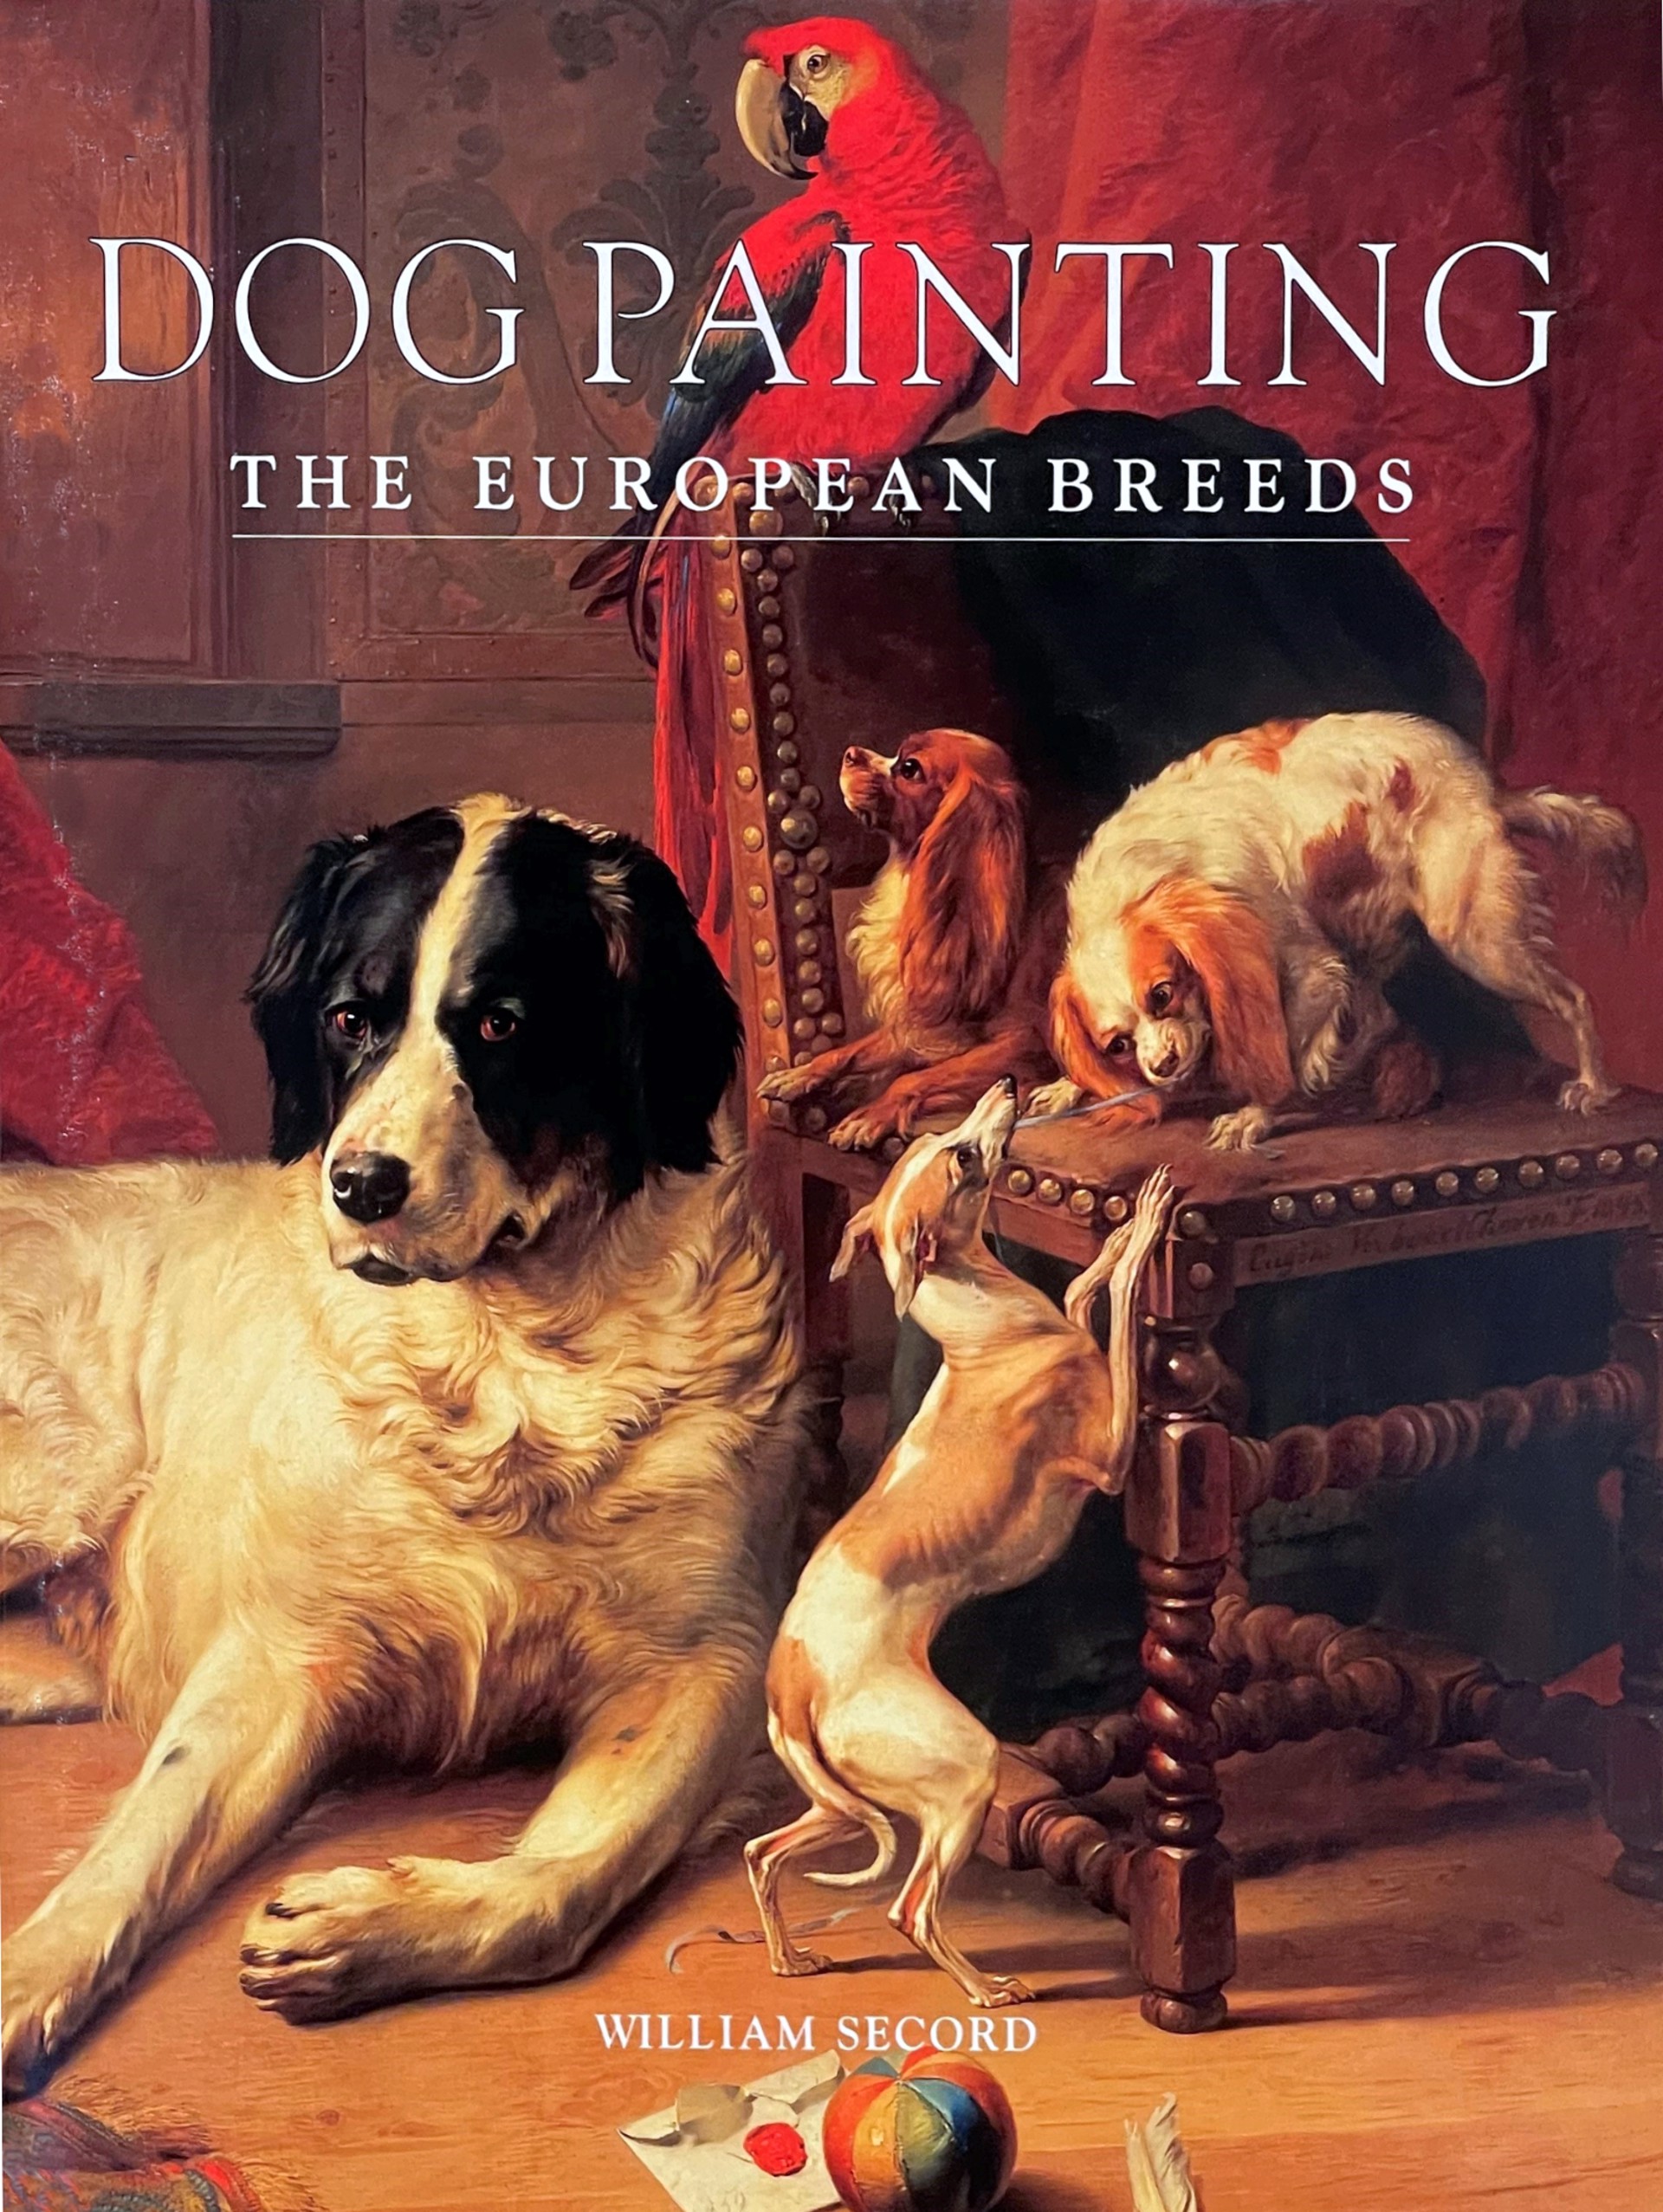 Dog Painting:  The European Breeds by William Secord